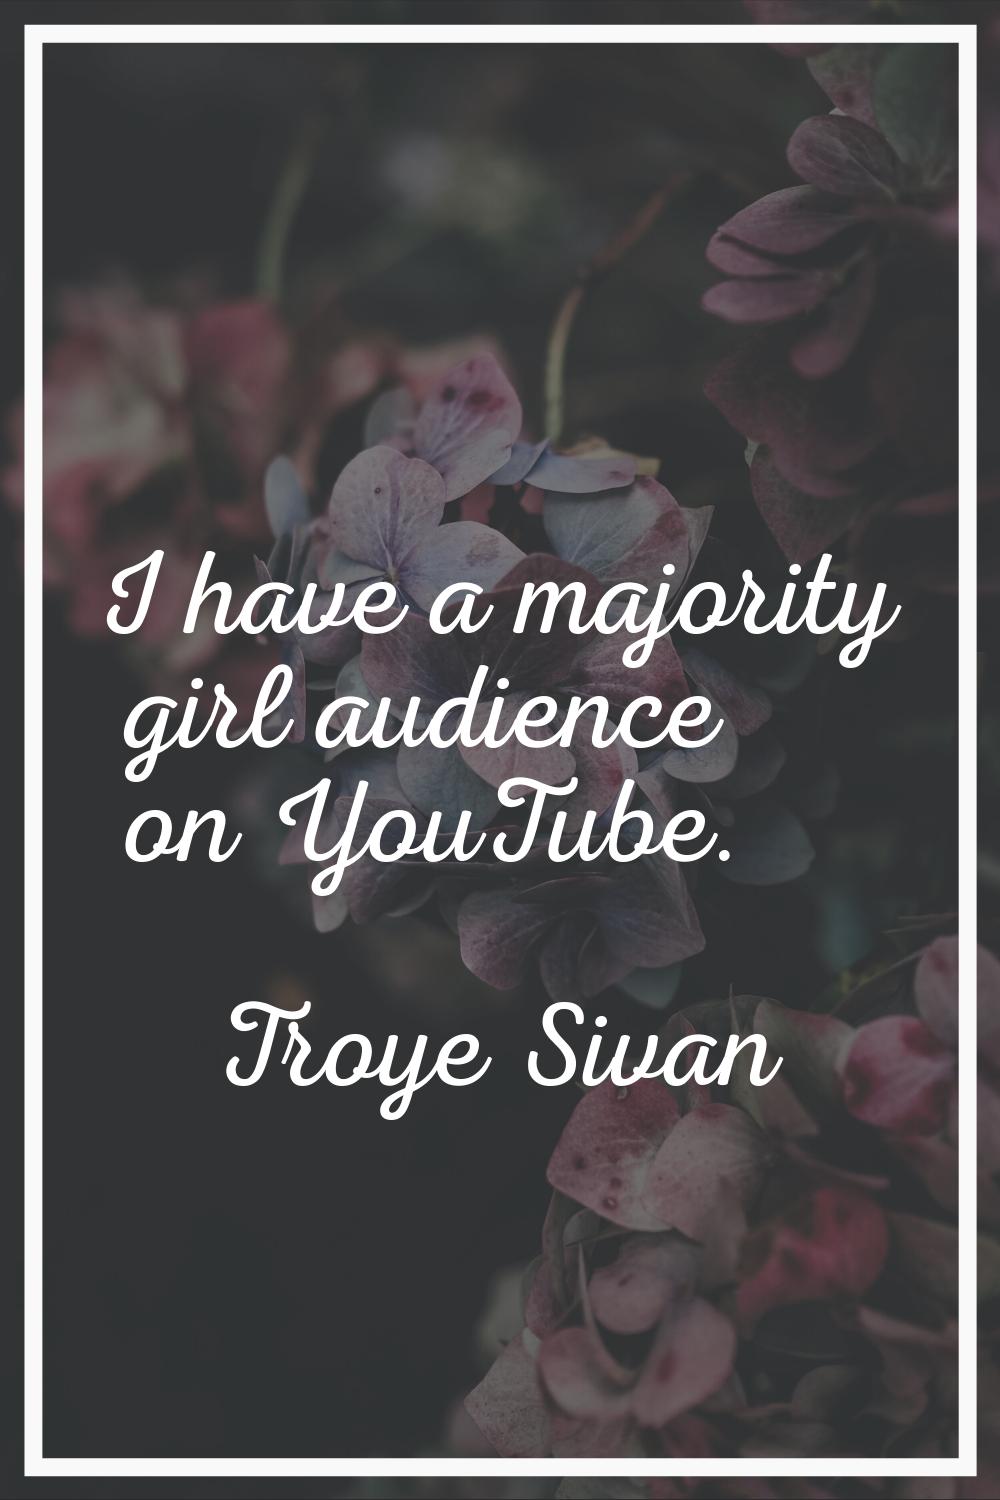 I have a majority girl audience on YouTube.